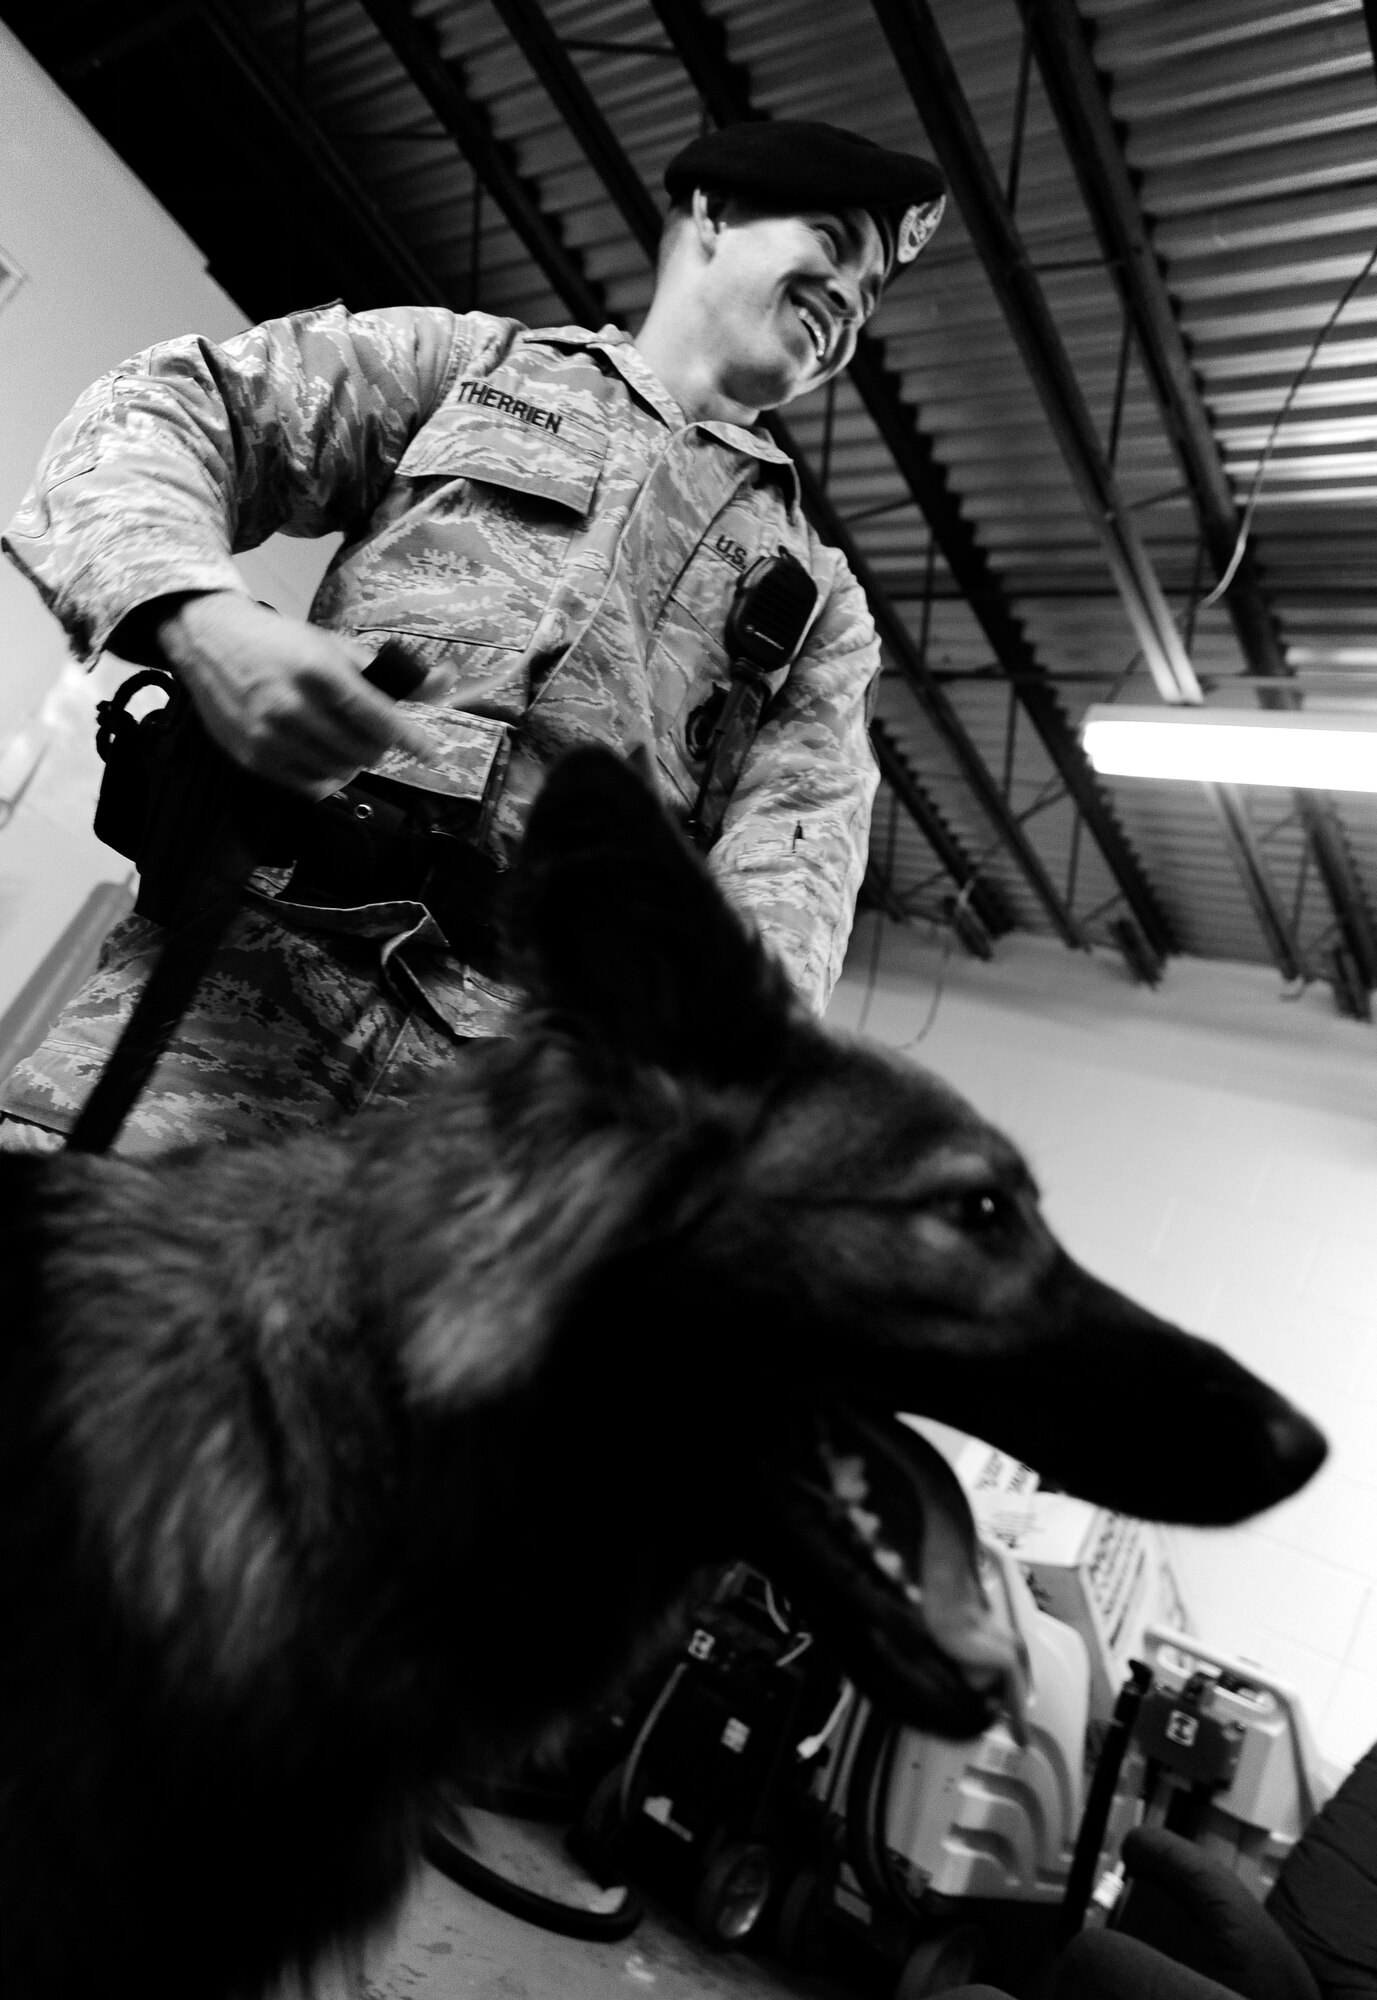 OFFUTT AIR FORCE BASE, Neb. - Staff Sgt. Joel Therrien, a military working dog handler with the 55th Security Forces Squadron, with Military Working Dog Dasty, a Belgian Tervuren , talk with other MWD handlers after a routine explosives and narcotics searching exercise Dec. 1. Dasty is certified by trainers from Lackland AFB to sniff out explosives.  Military working dog teams have led explosive searches for such recent distinguished visitors as the Secretary of Defense, Vice President, First Lady and countless other base visitors and public events. U.S. Air Force Photo by Josh Plueger (Released)